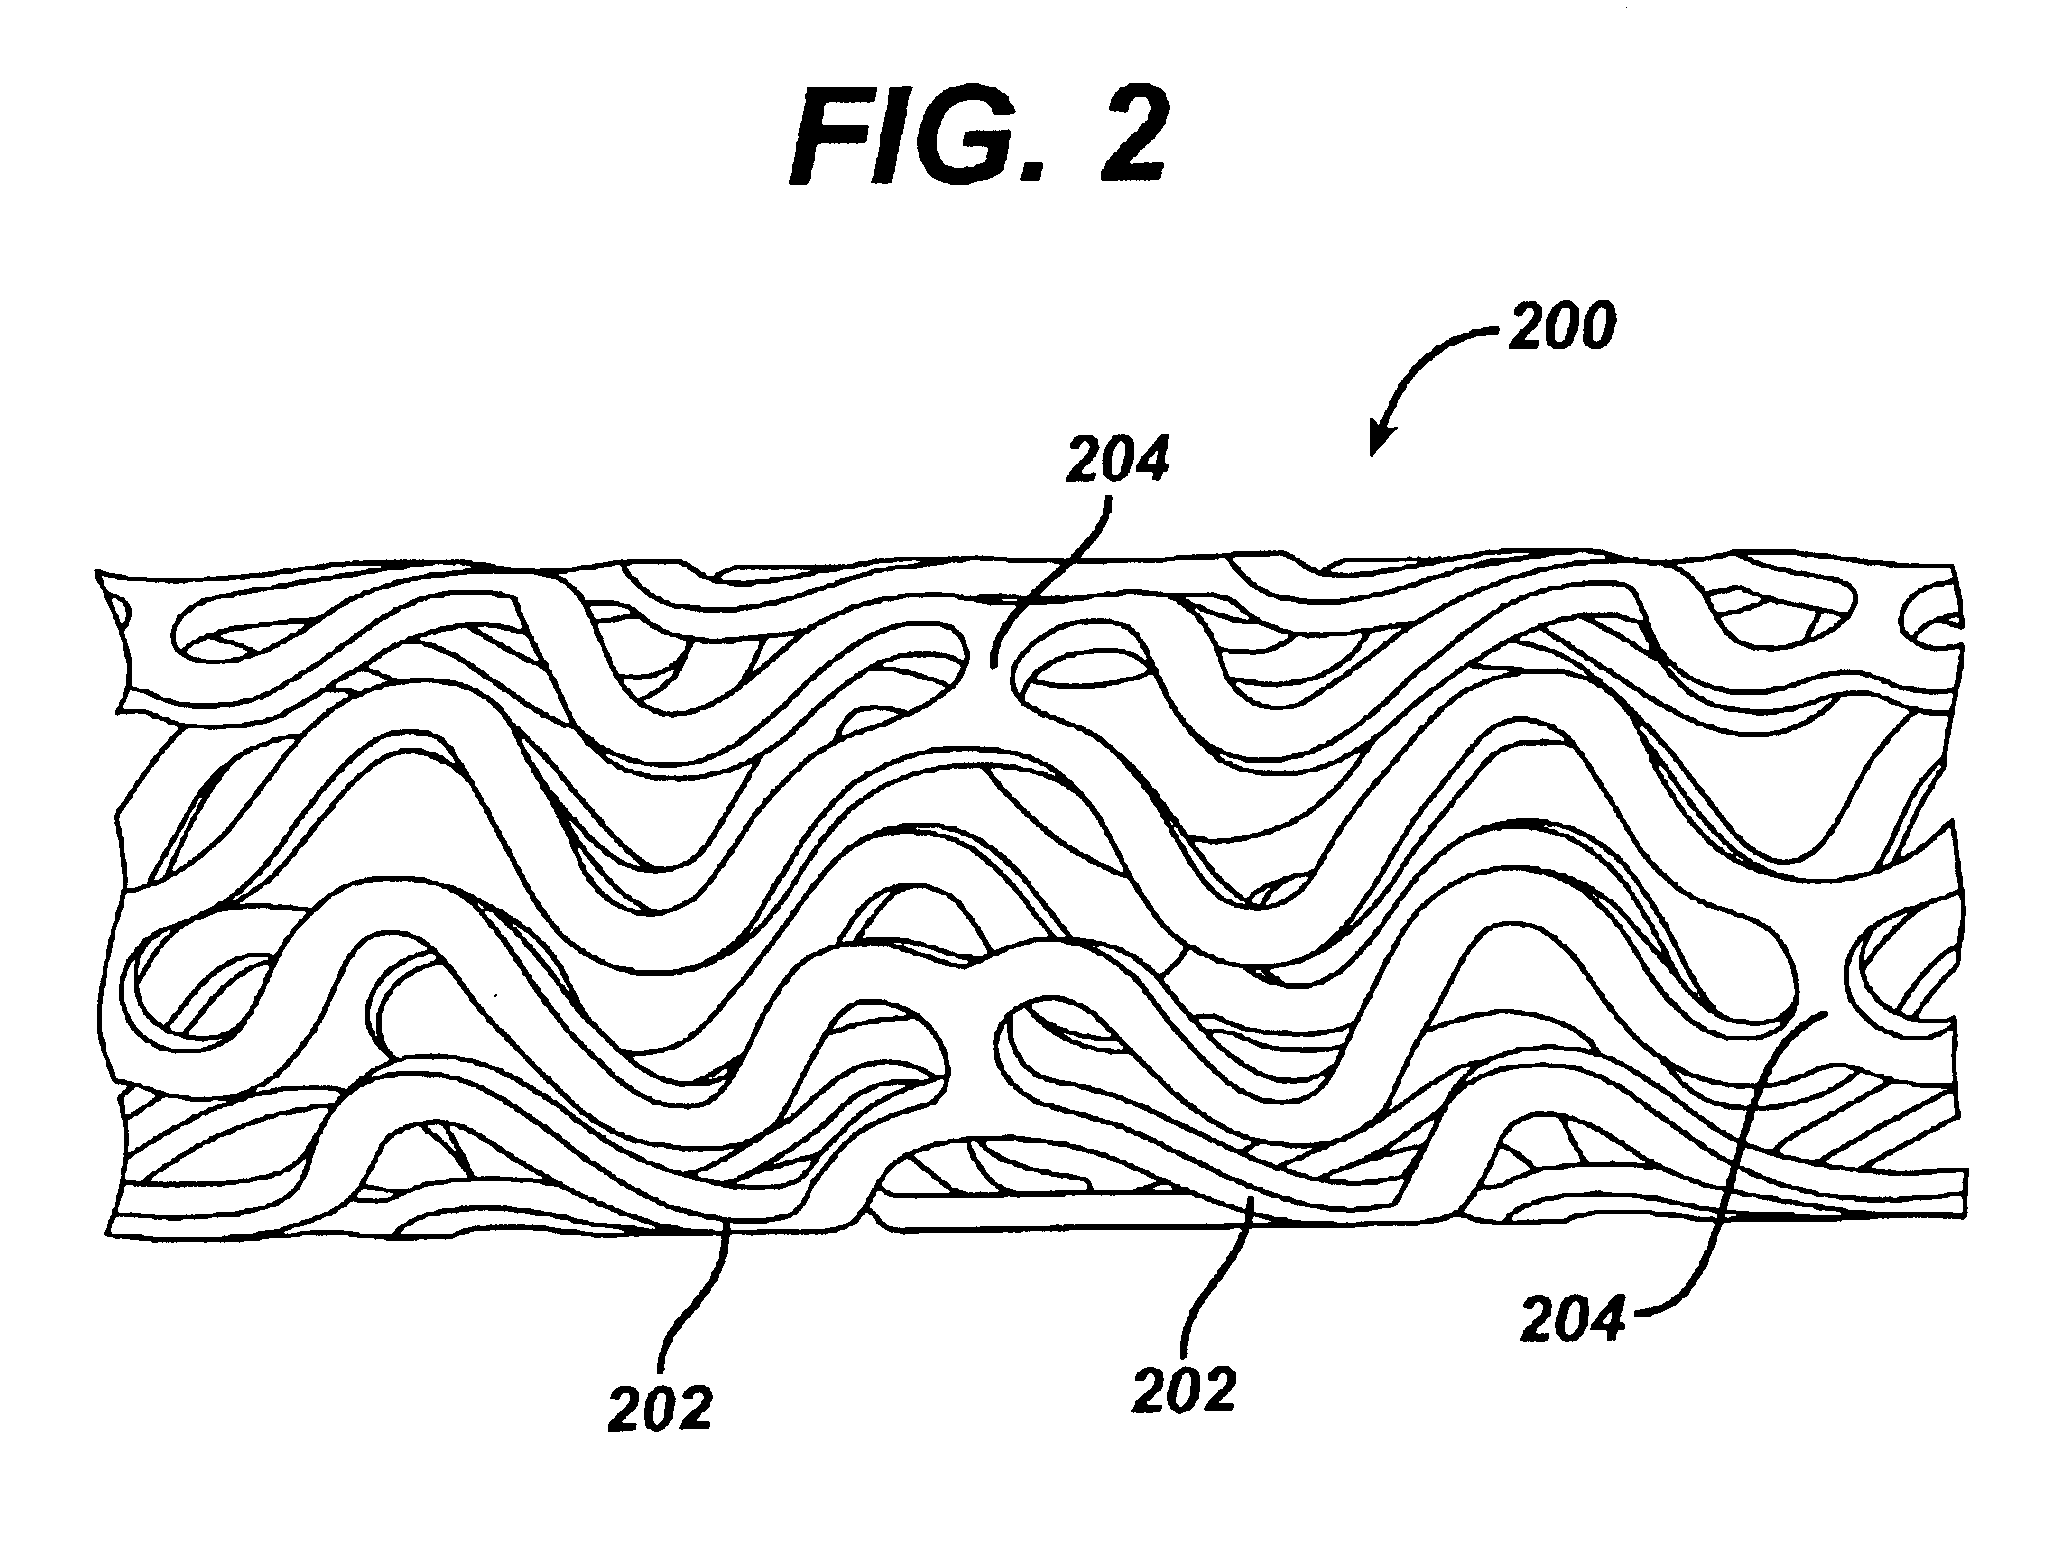 Method for coating medical devices